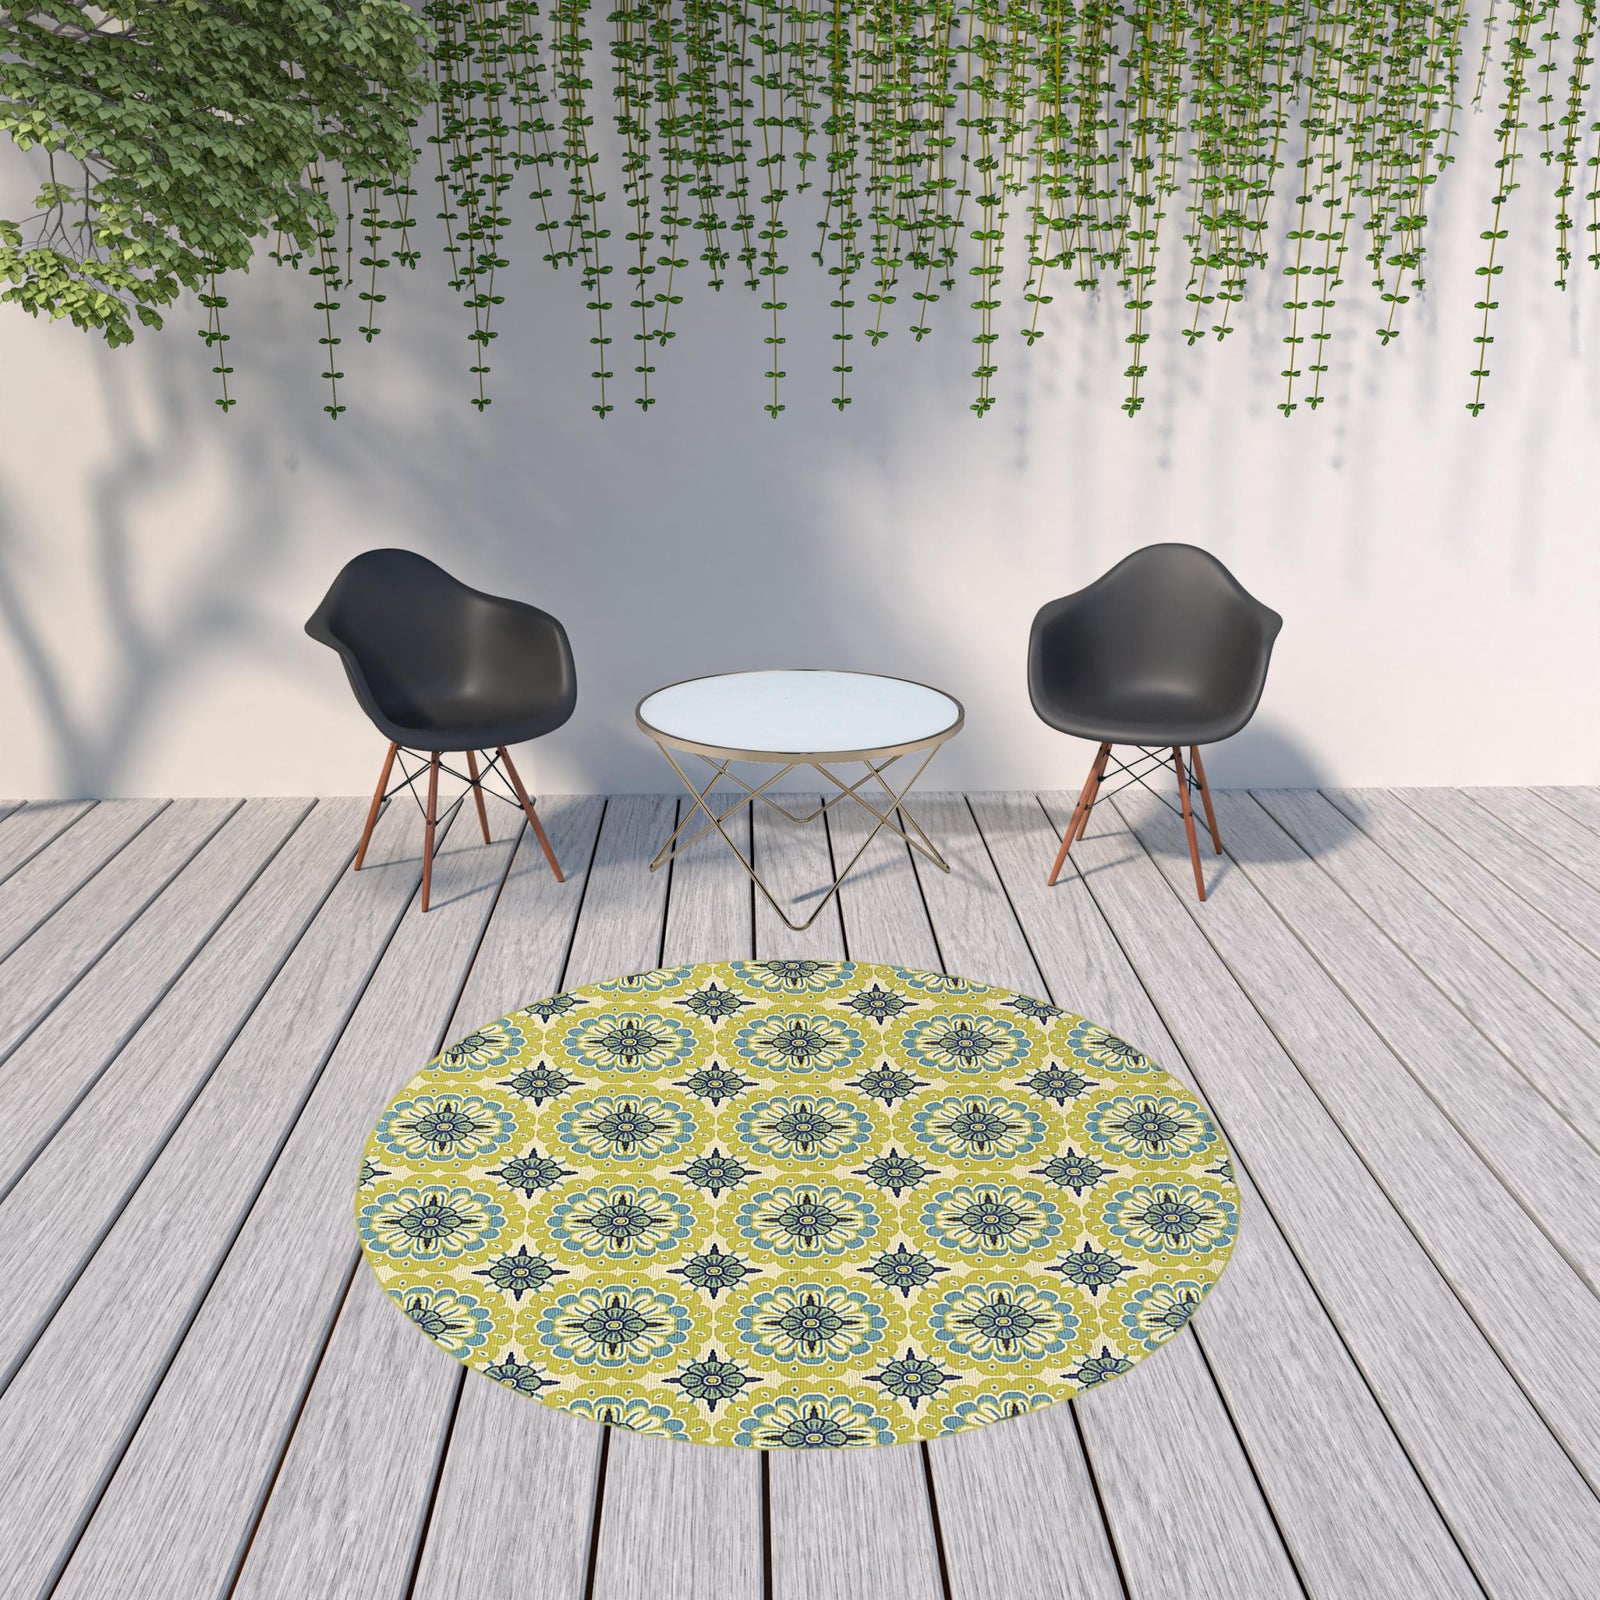 8' Round Green Round Floral Stain Resistant Indoor Outdoor Area Rug